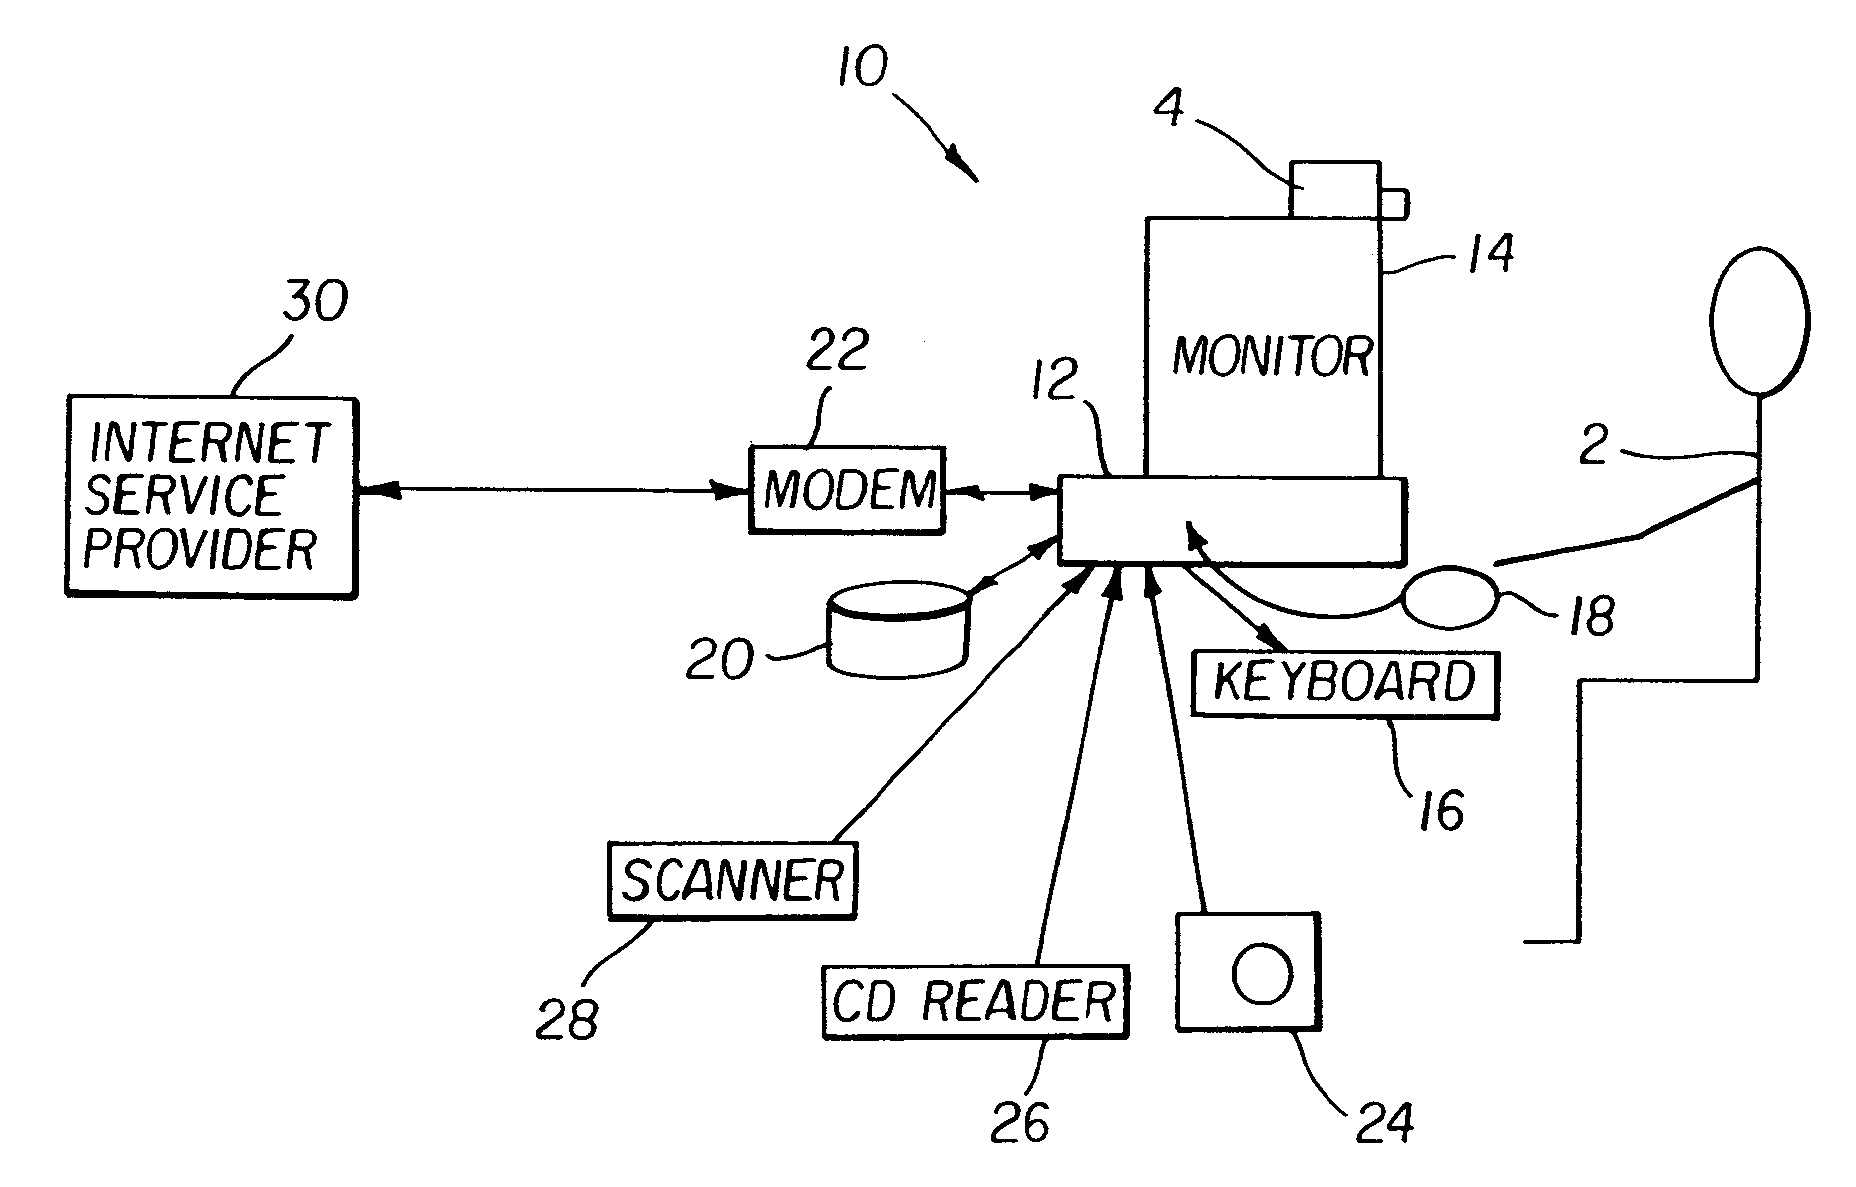 Method for creating and using affective information in a digital imaging system